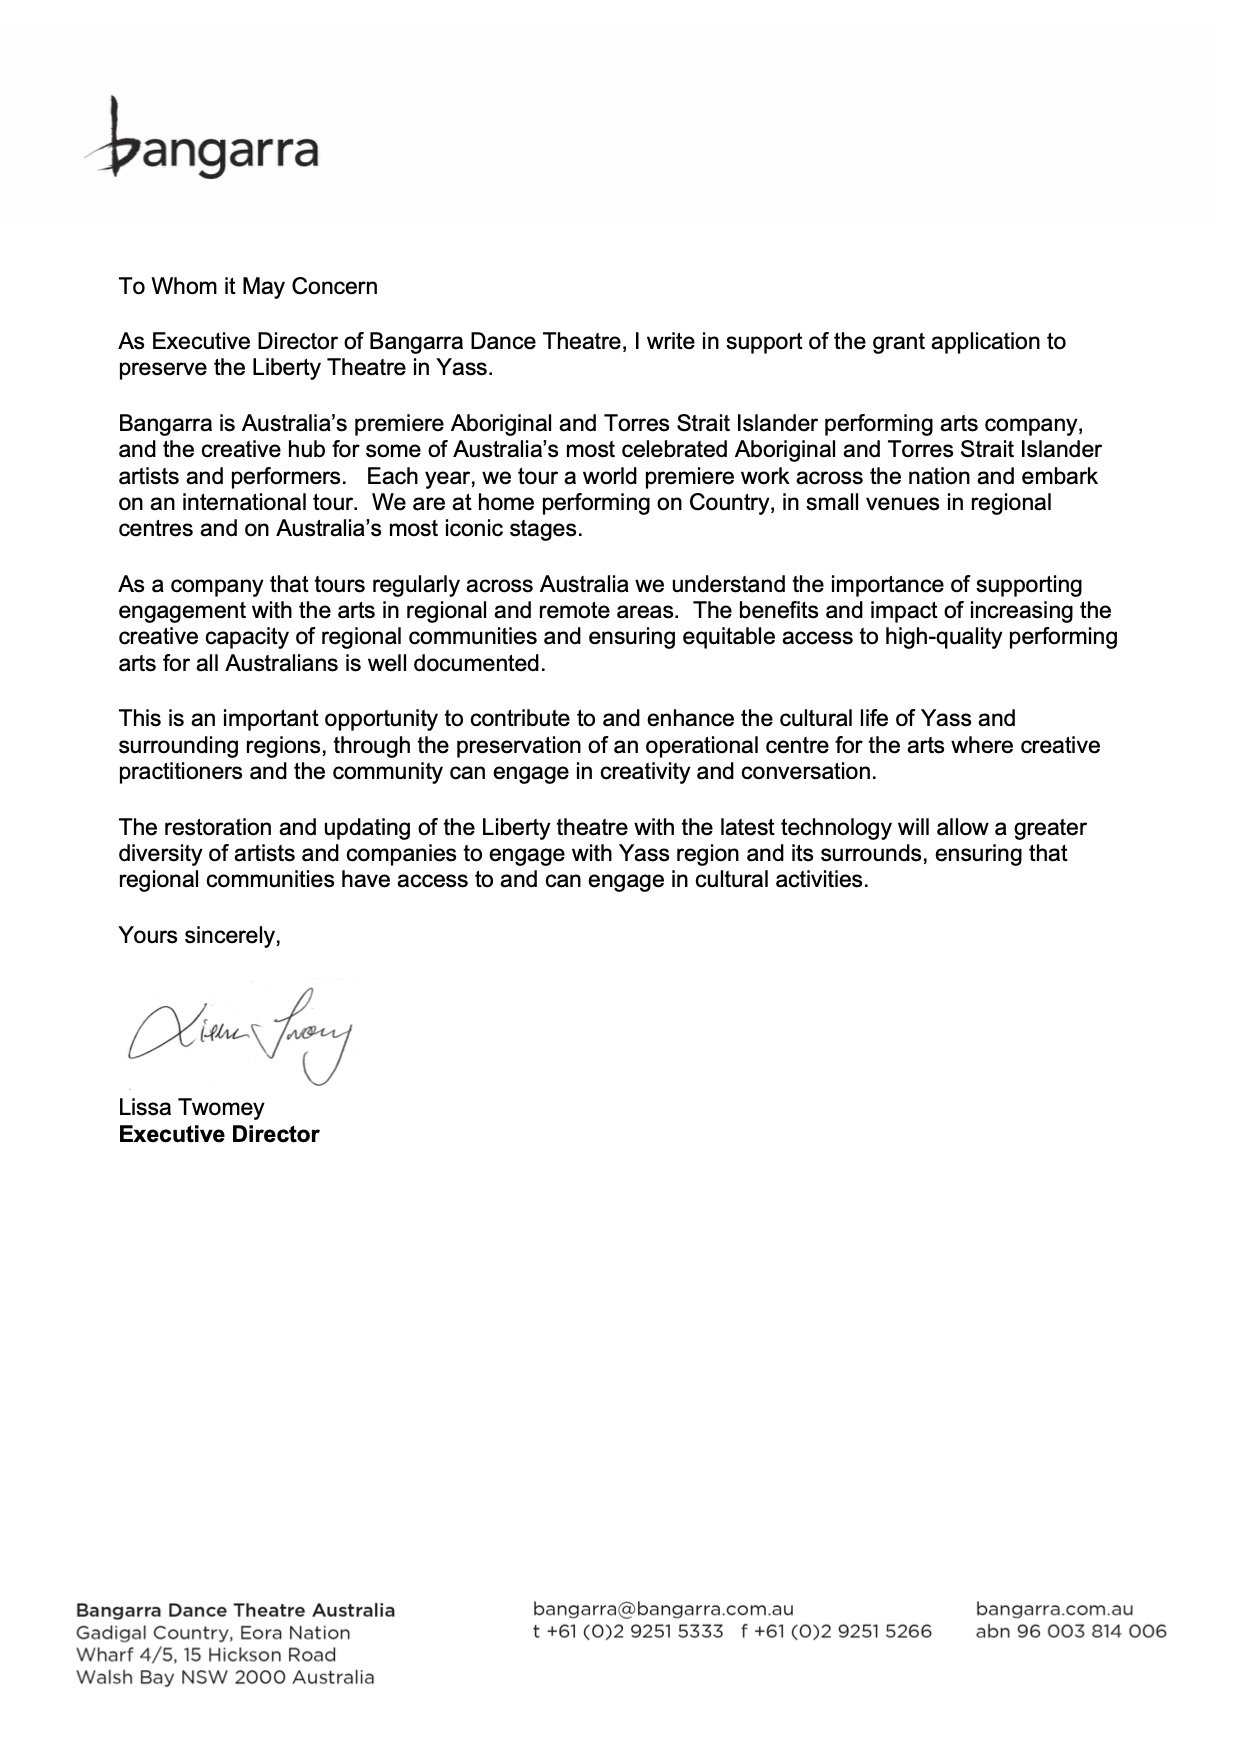 Bangarra Dance Company Yass Liberty theatre, Lissa Twomey Letter of Support April 2022.jpg